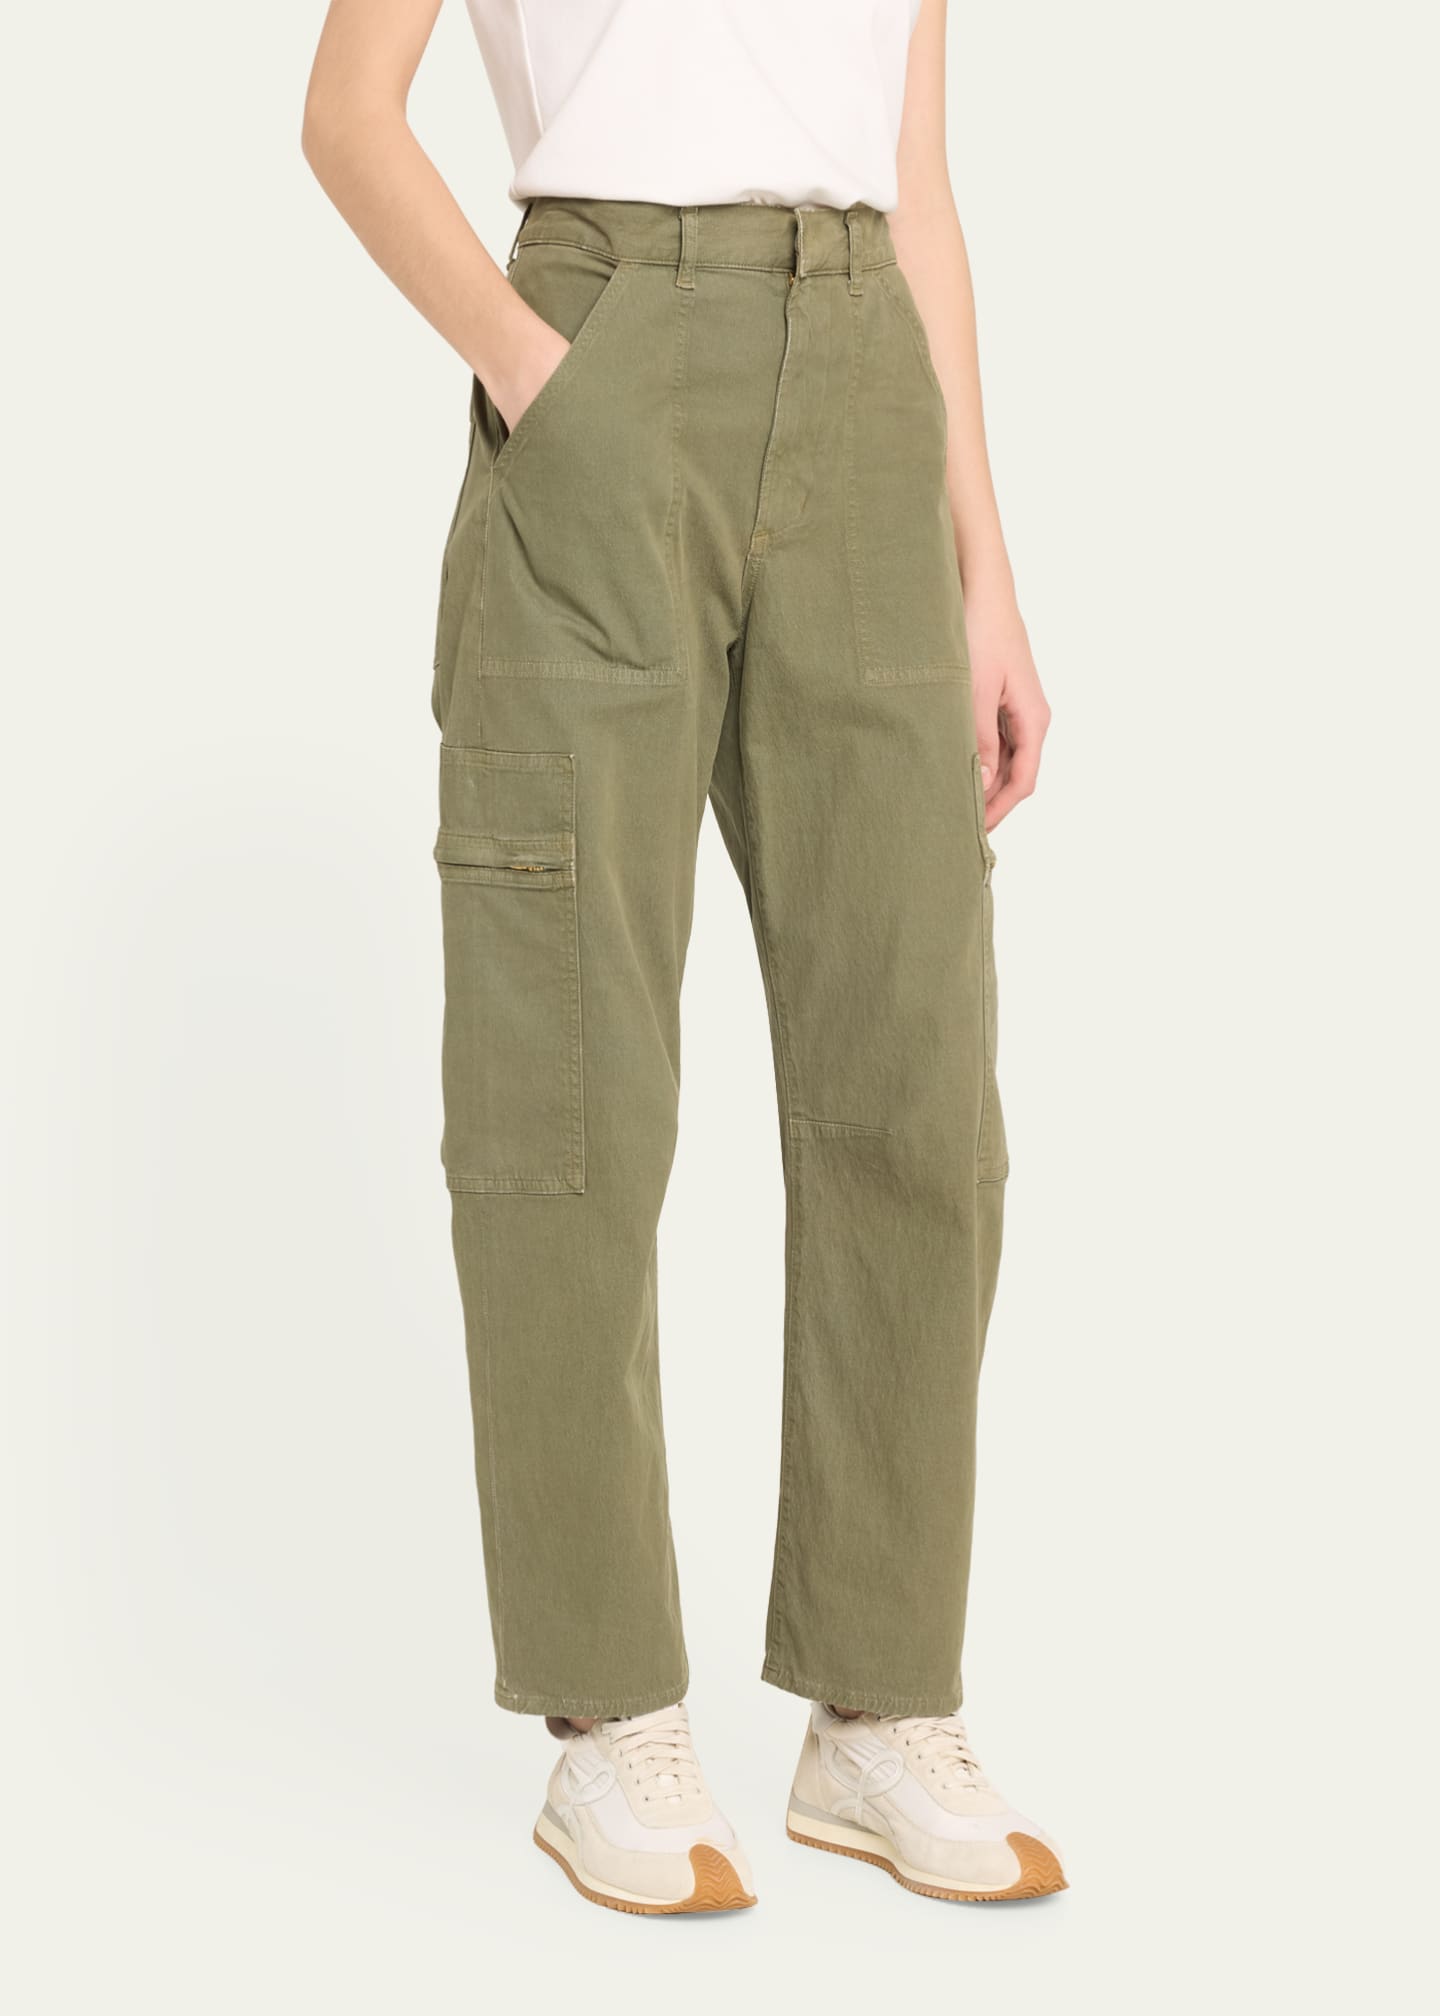 Citizens of Humanity Marcelle Straight Twill Cargo Pants - Bergdorf Goodman